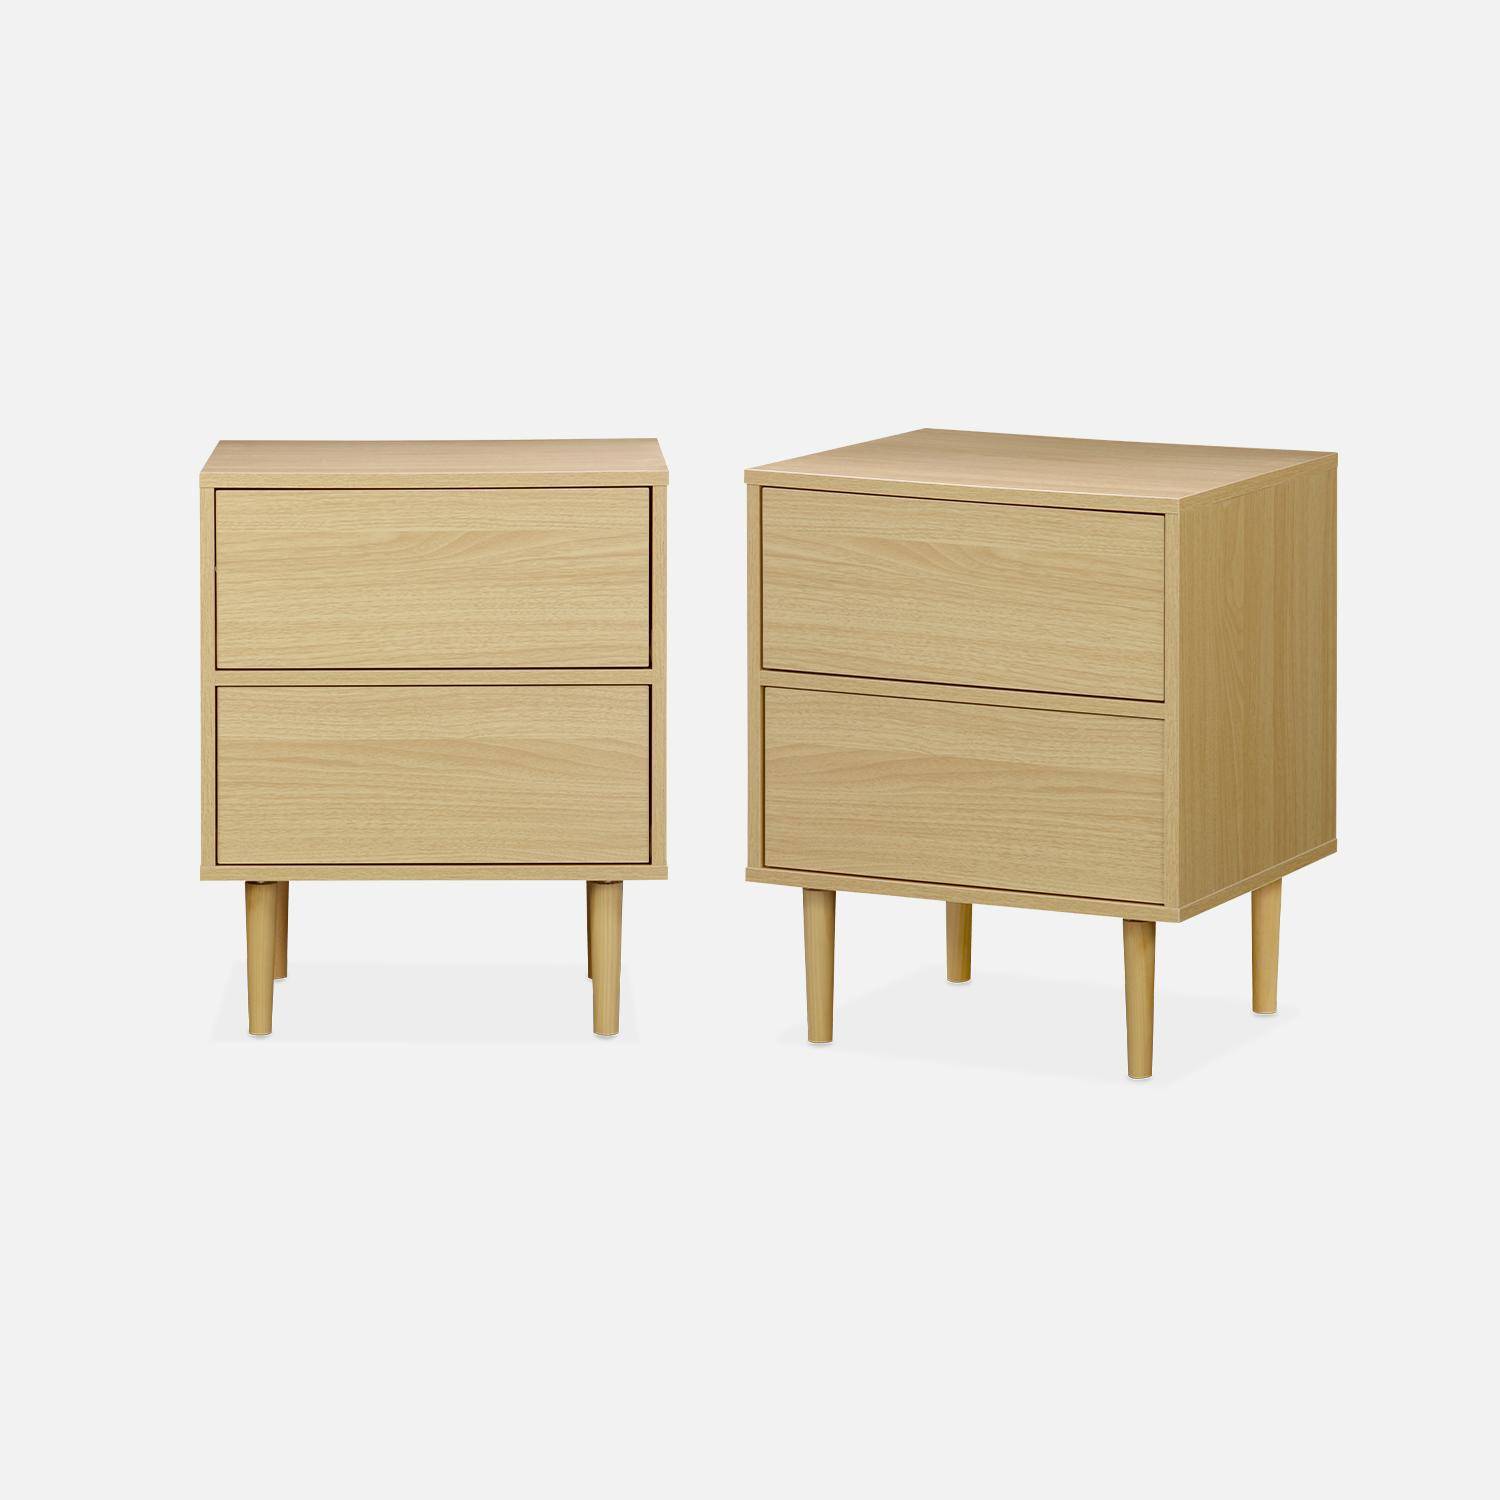 Pair of wood-effect bedside tables with two drawers, 48x40x59cm - Mika - Natural Wood,sweeek,Photo3